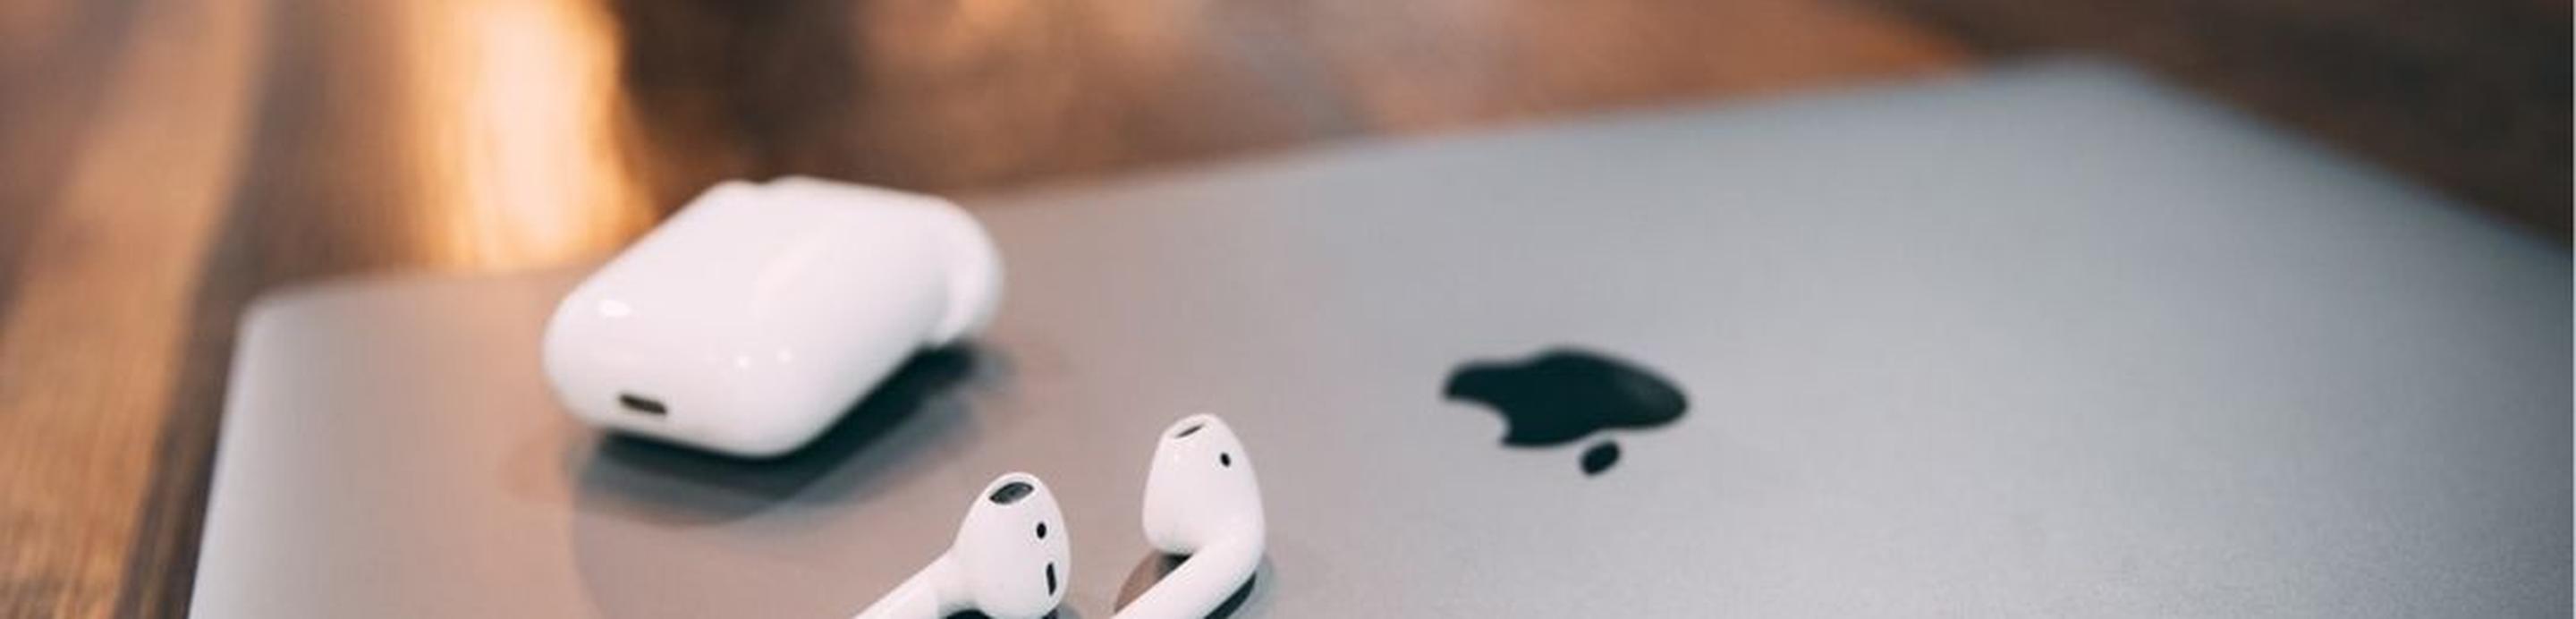 how-to-spot-fake-airpods-article-banner